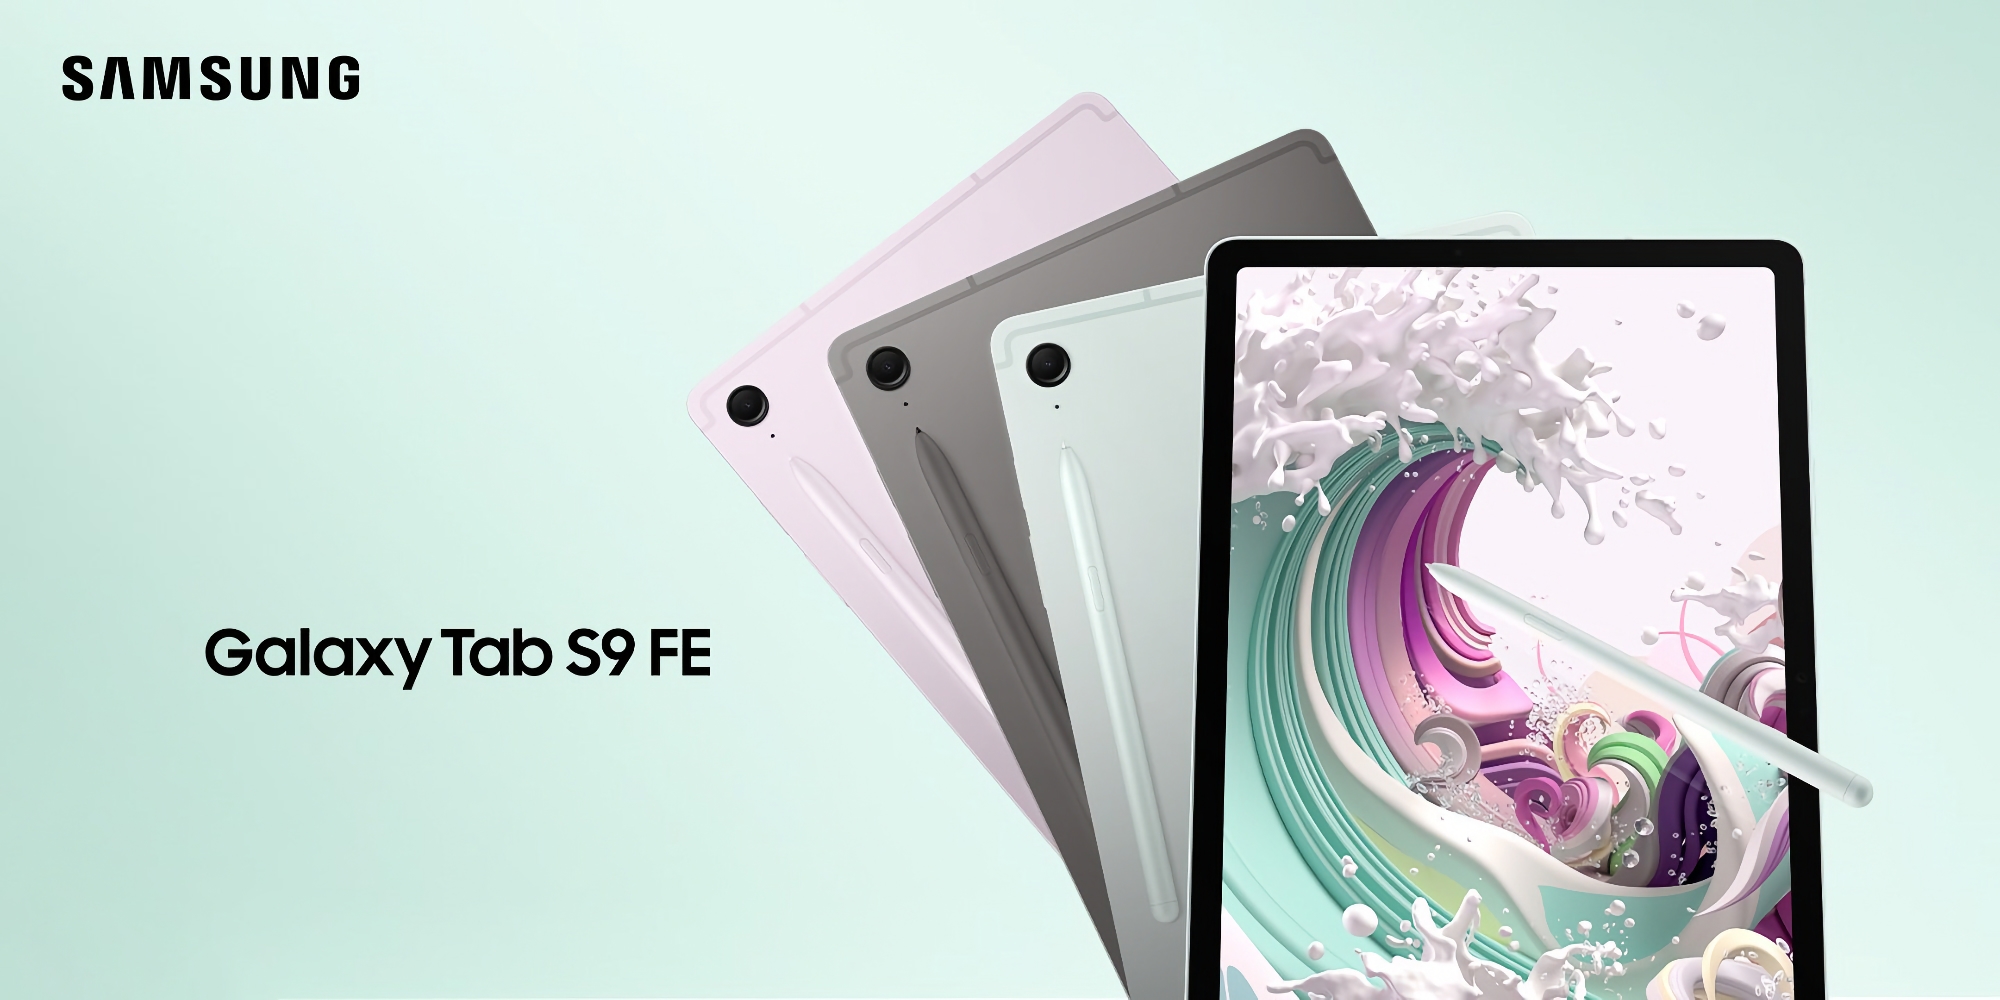 Discount $79: Samsung Galaxy Tab S9 FE is available on Amazon at a promotional price